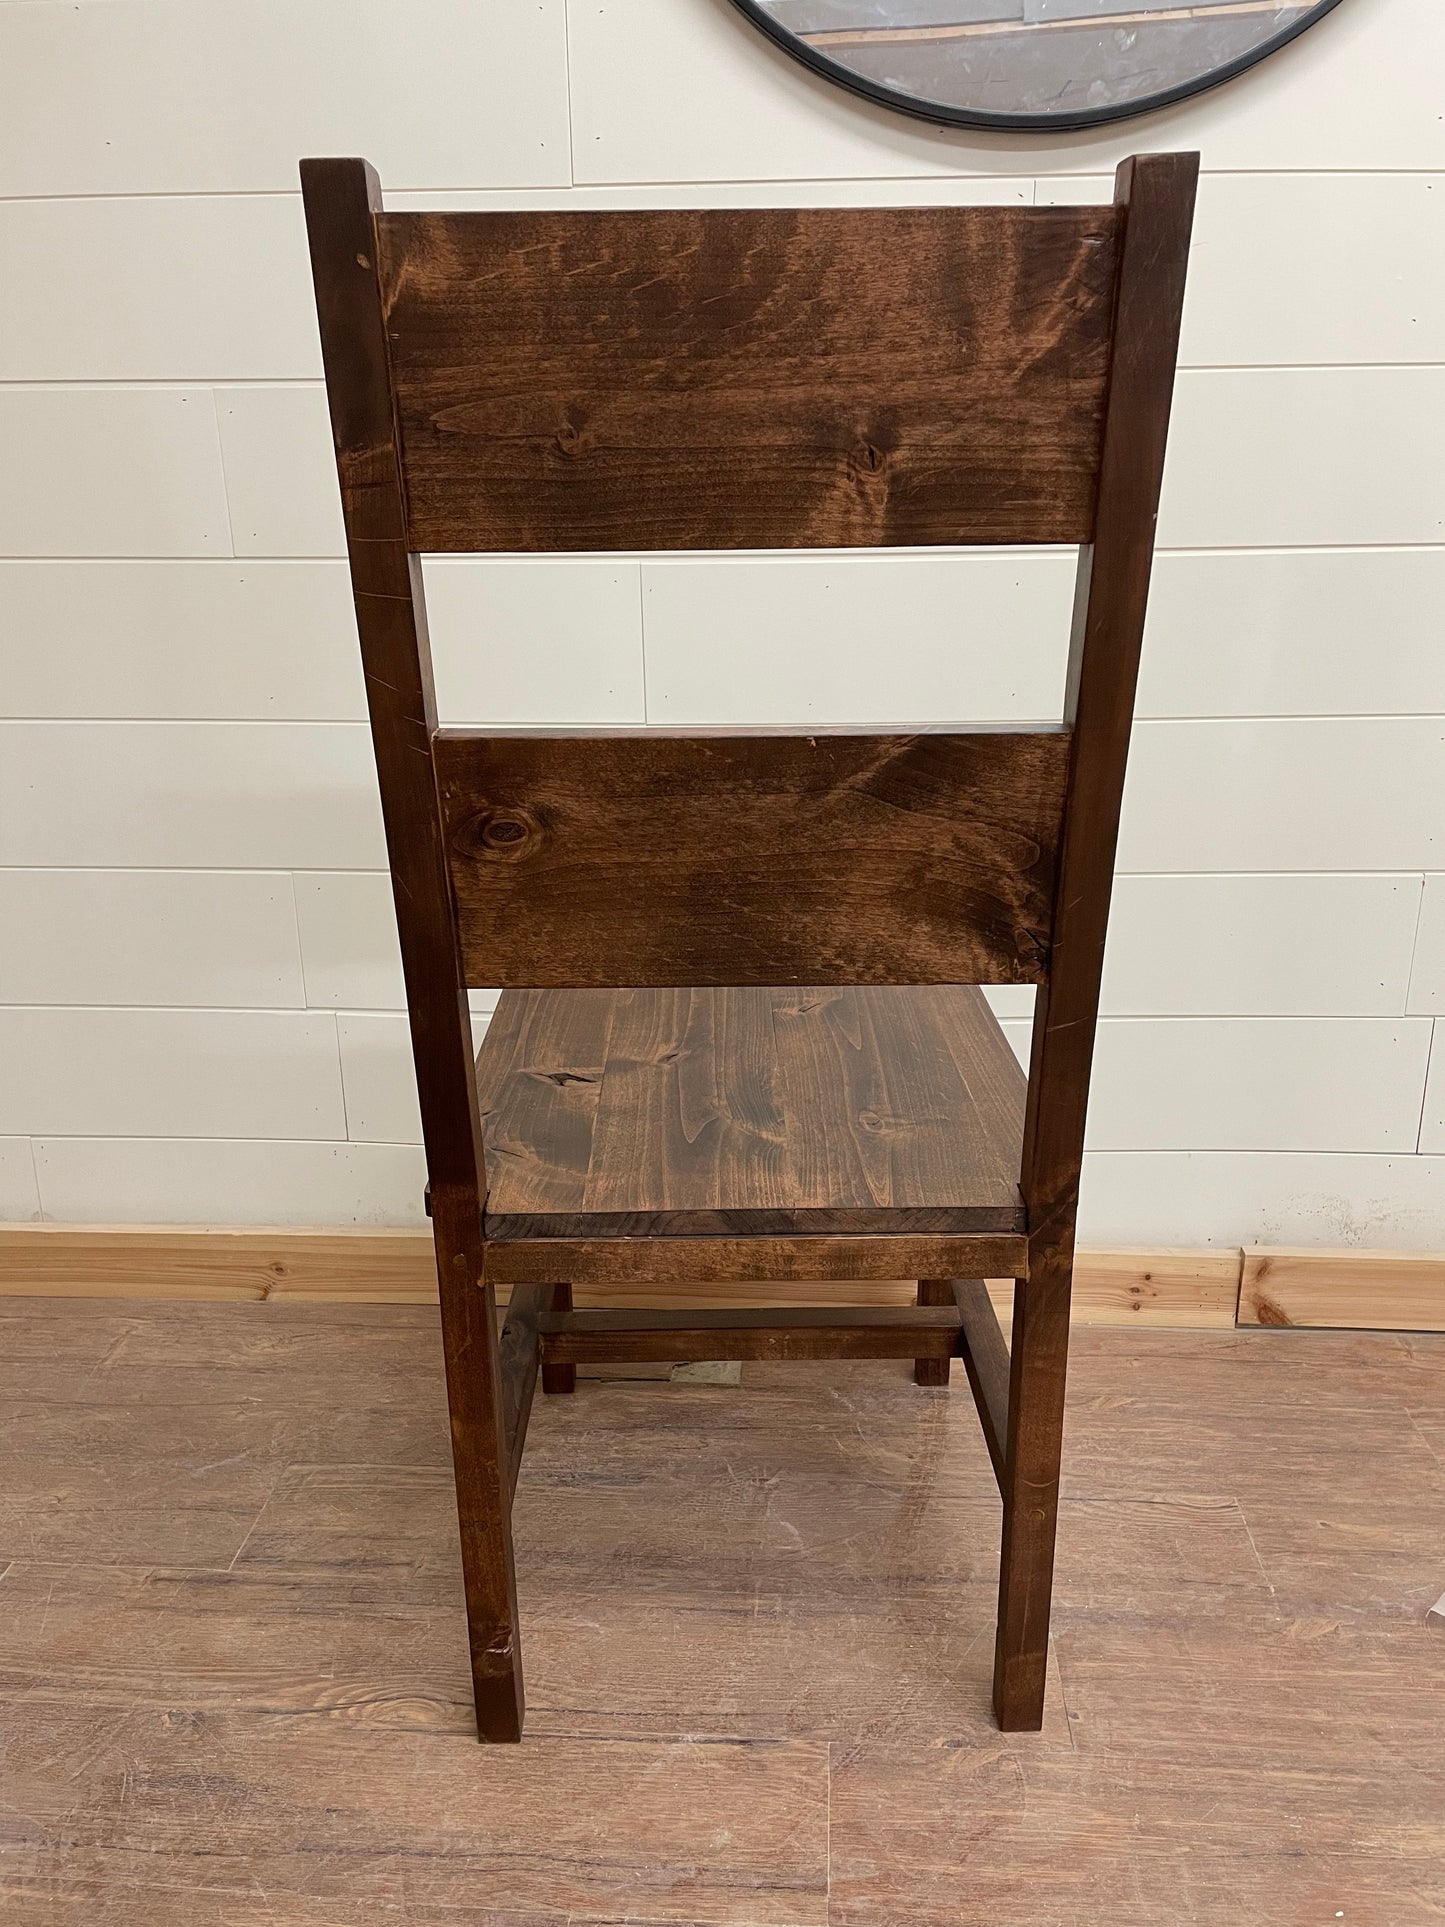 Jase Dining Chair